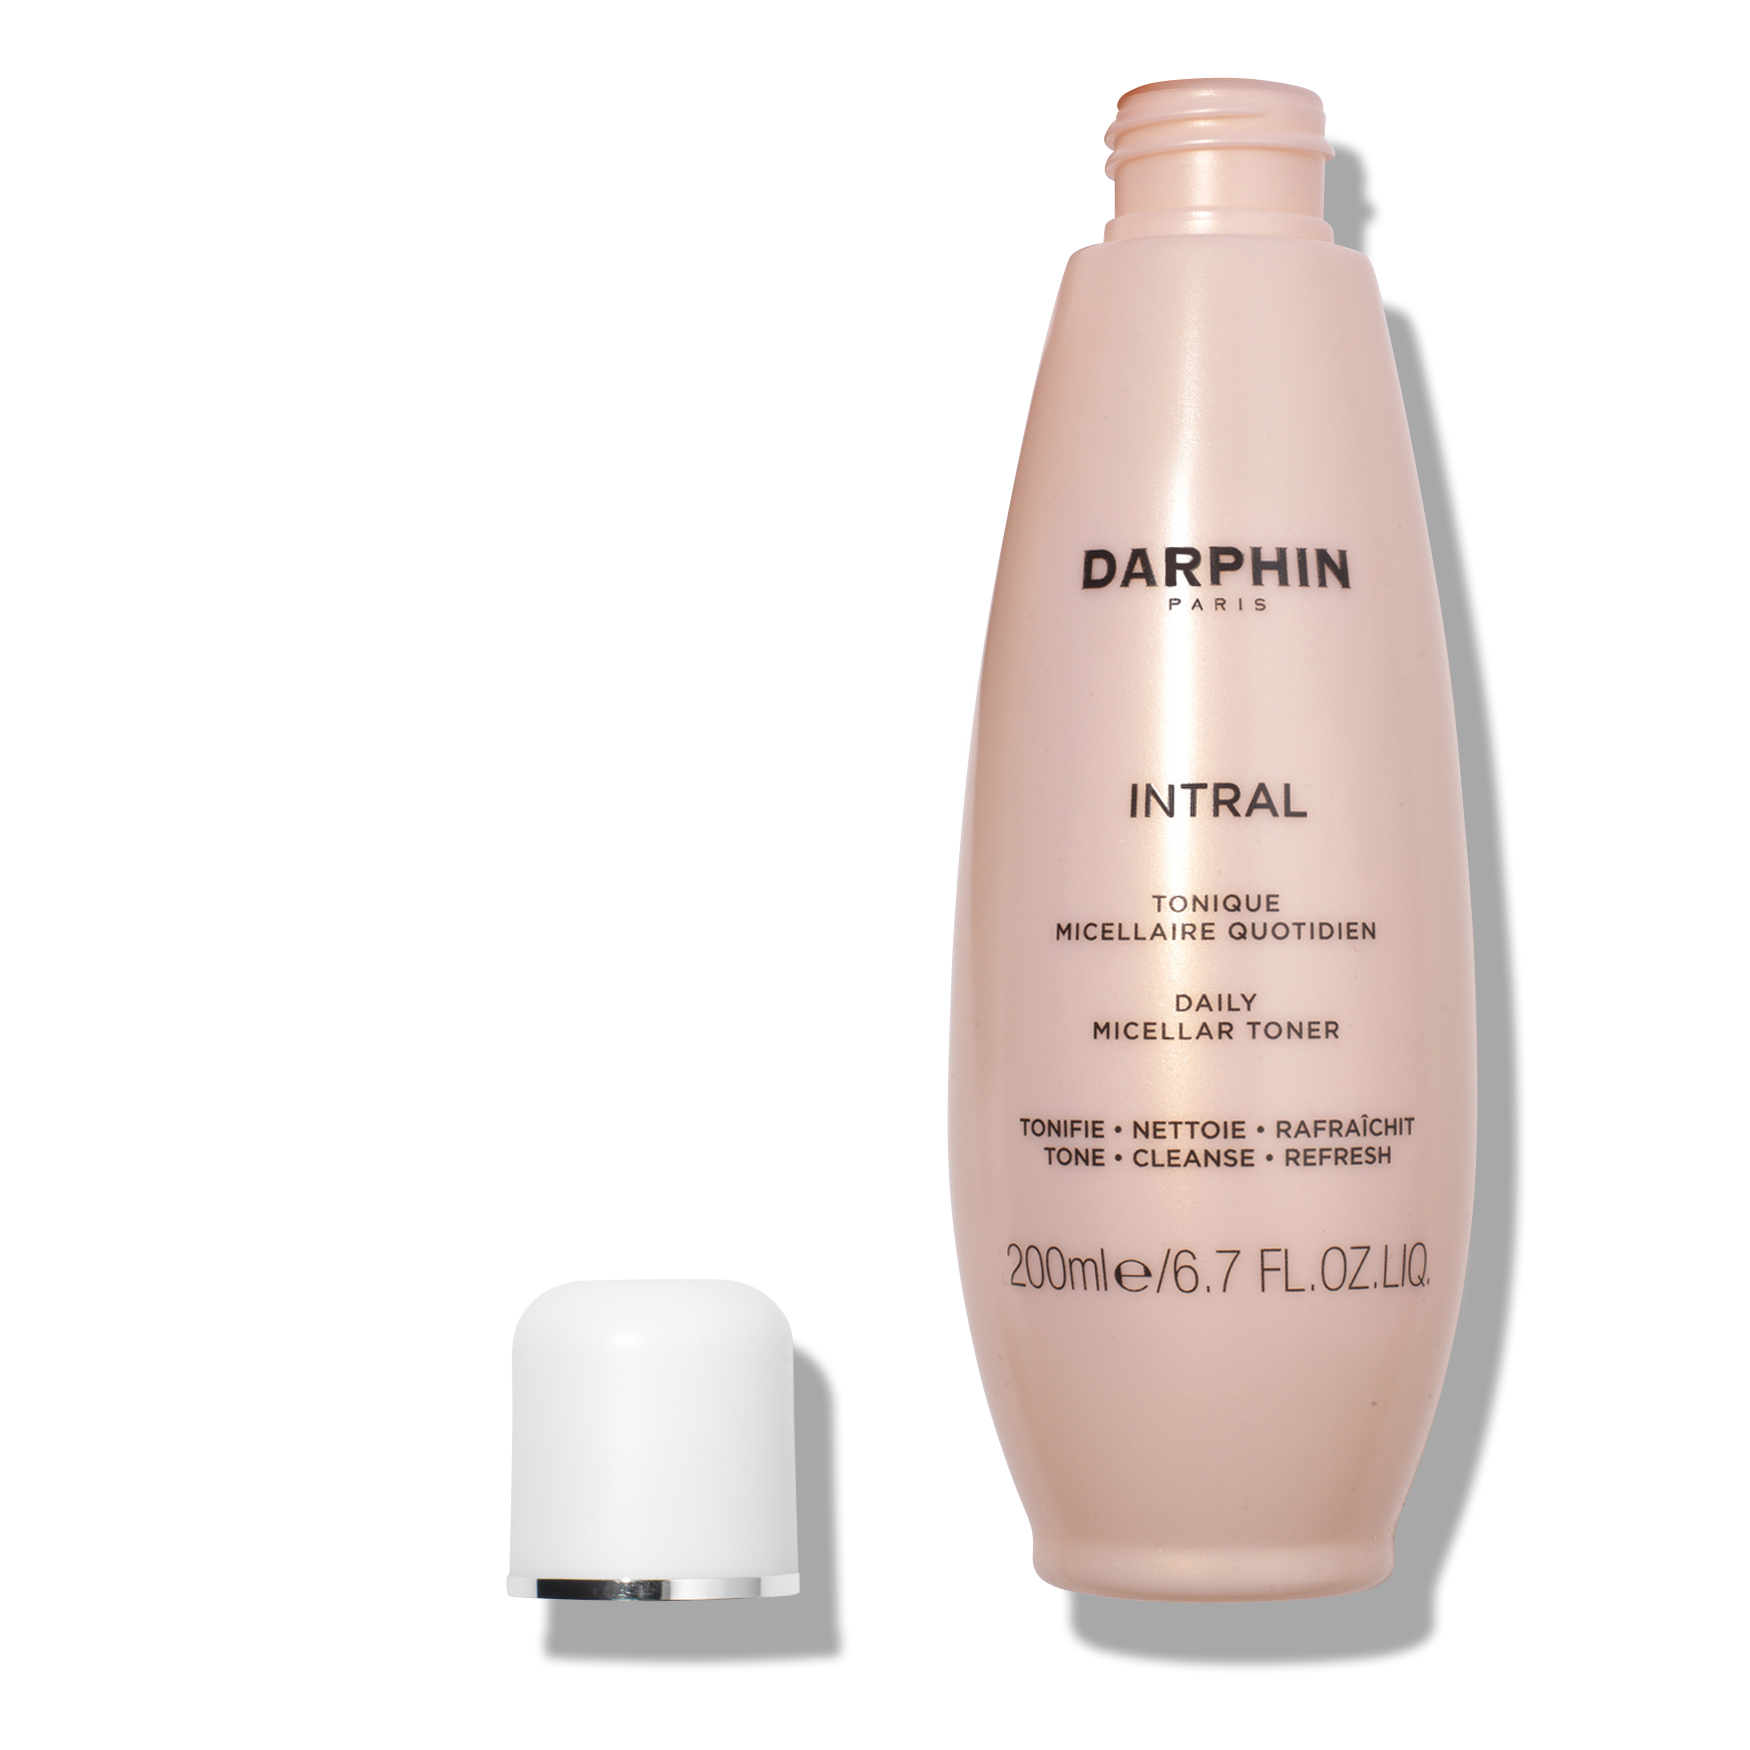 Darphin Intral Daily Micellar Toner | Space NK